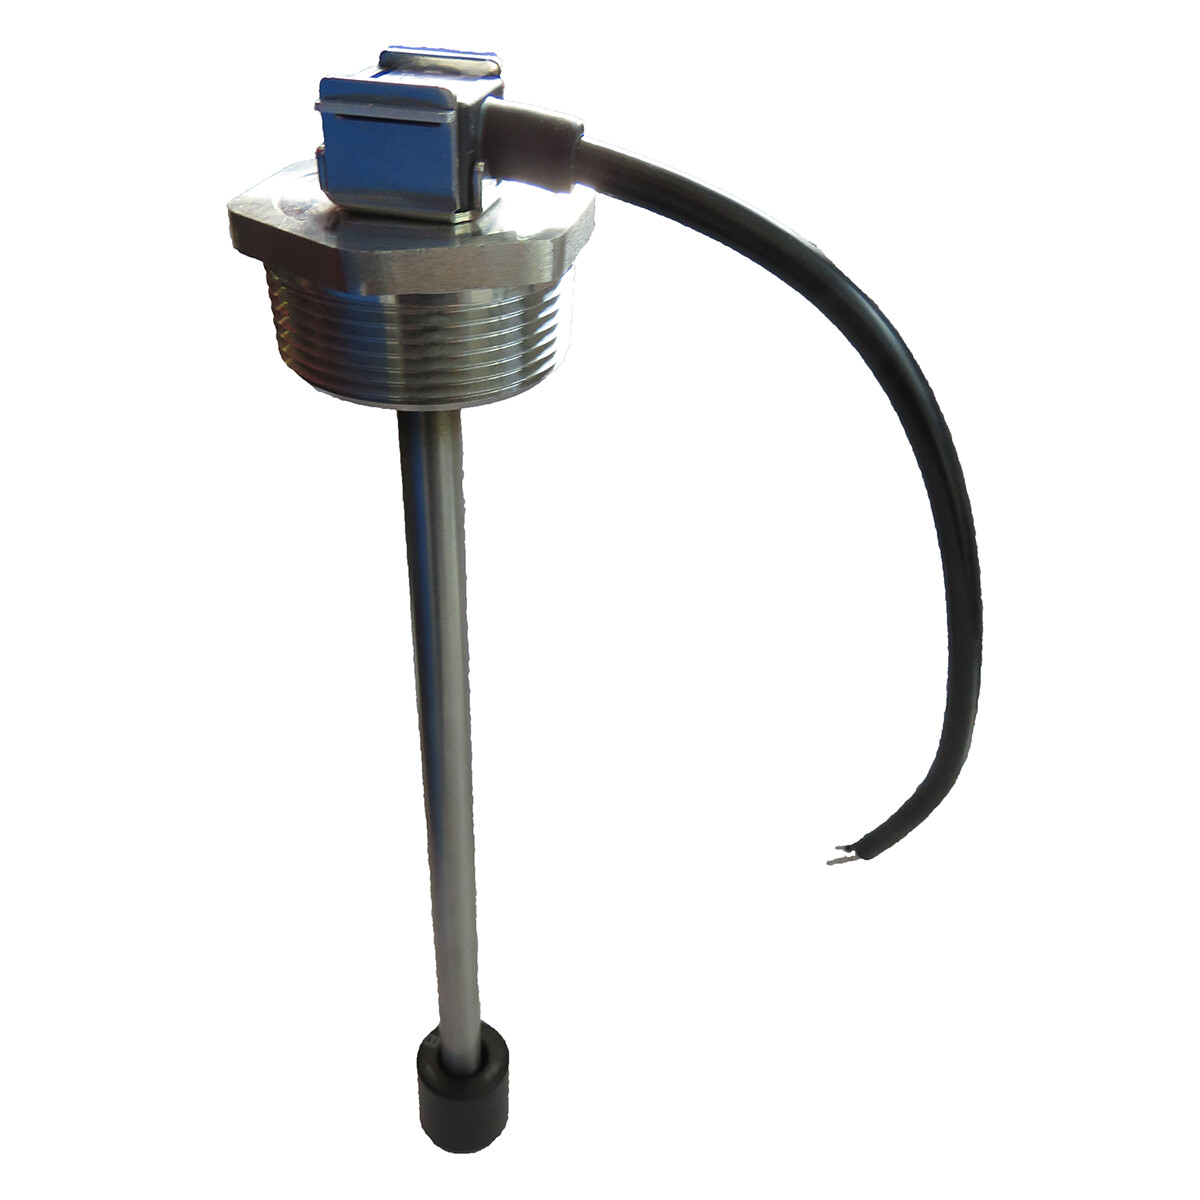 Rochester Sensors 9815-20060 Reed Switch Fuel Level Sender 6"L x 1.5" NPTF, 240-30 ohm Output